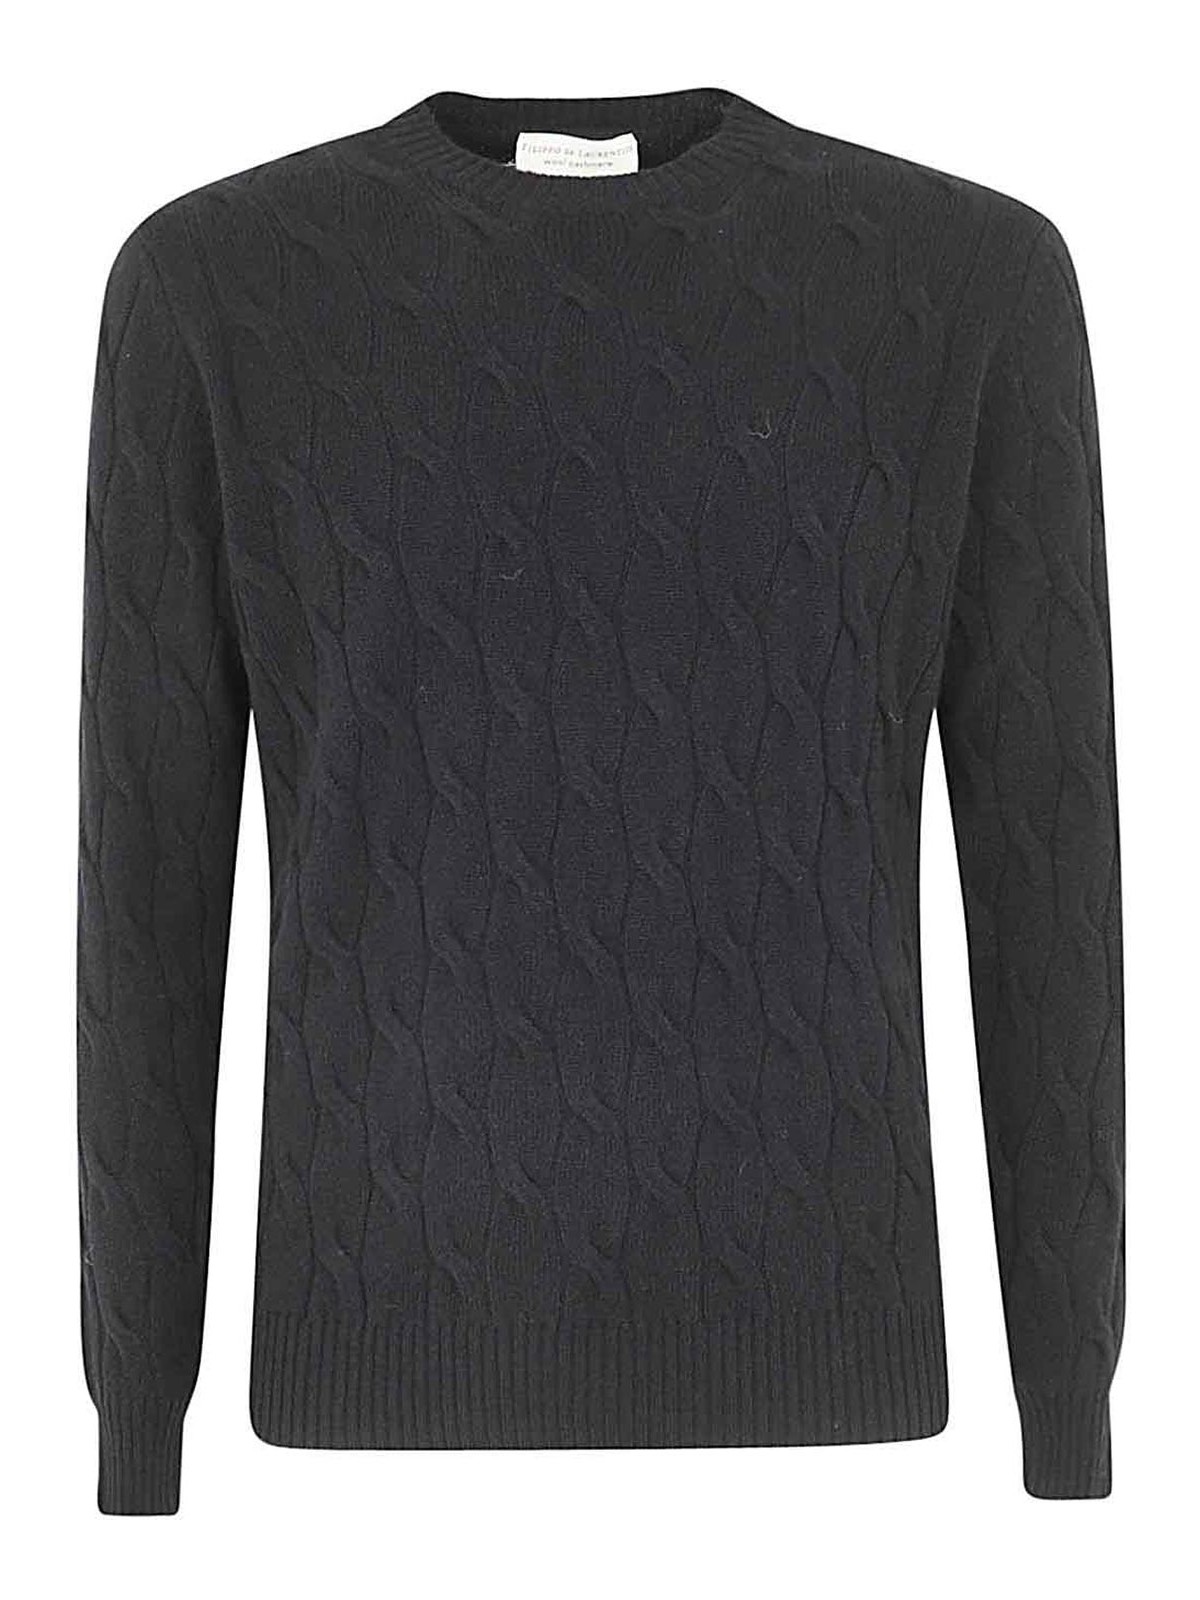 Filippo De Laurentiis Wool Cashmere Long Sleeves Crew Neck Sweater With Braid In Black